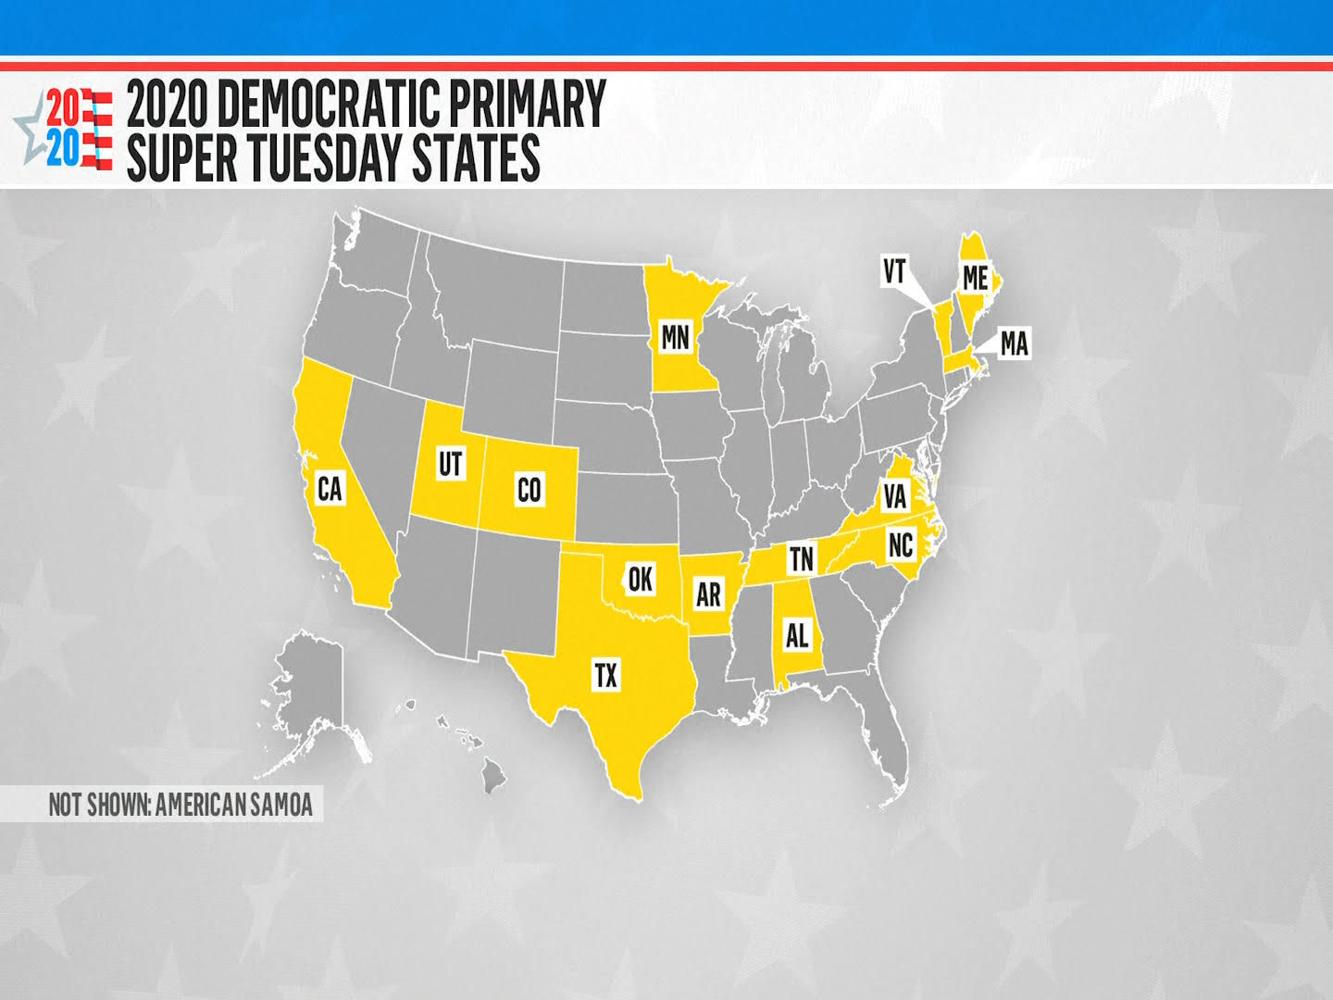 Super Tuesday 14 states across the nation are holding primaries today